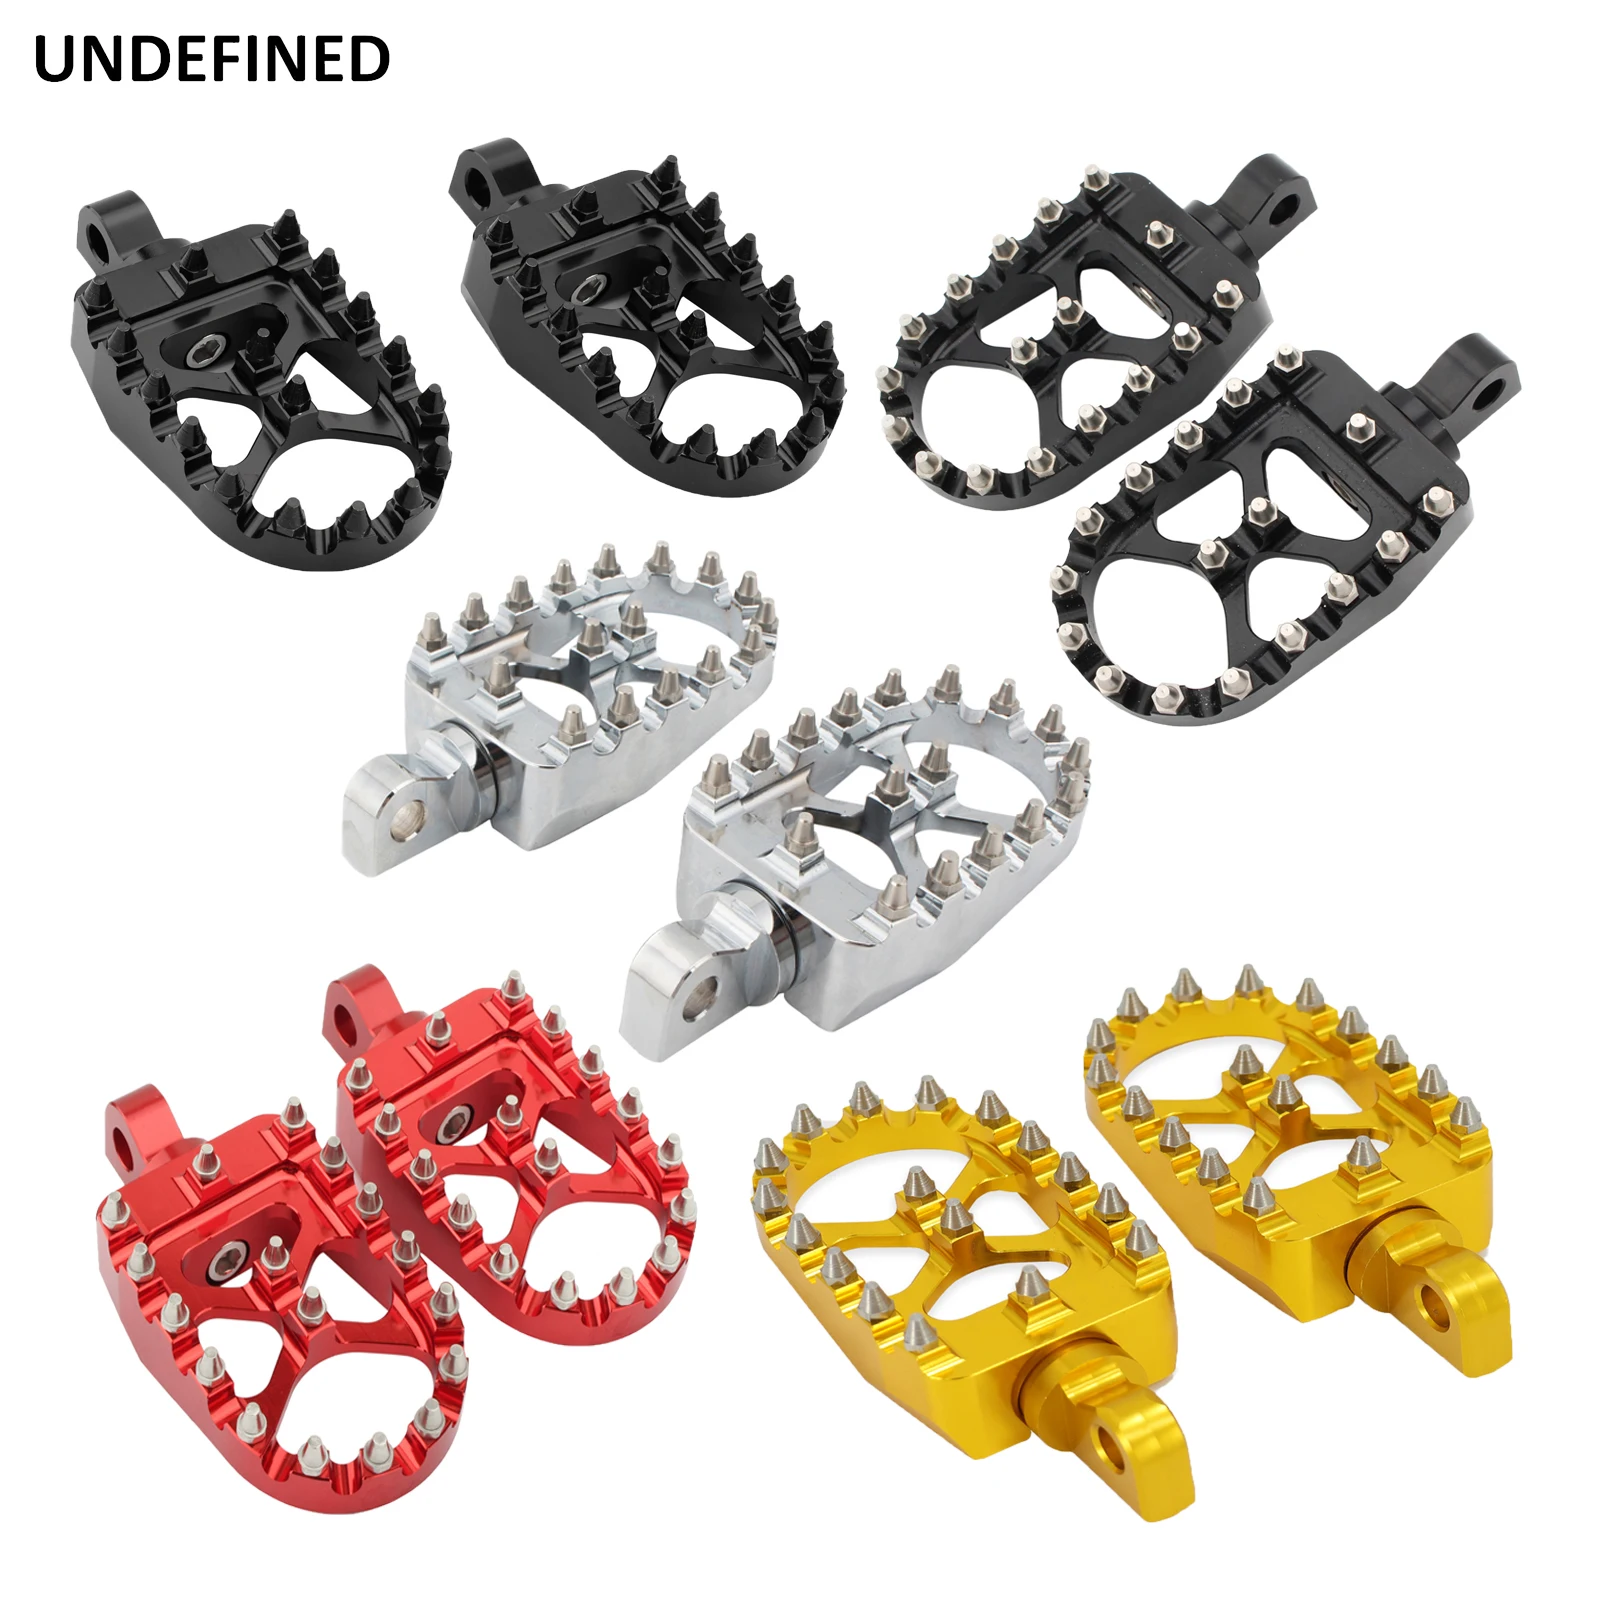 

Motorcycle MX Foot Pegs Offroad Wide Fat Footrests Pedals For Harley Dyna Fat Boy Street Bob Wide Glide Sportster XL 883 1200